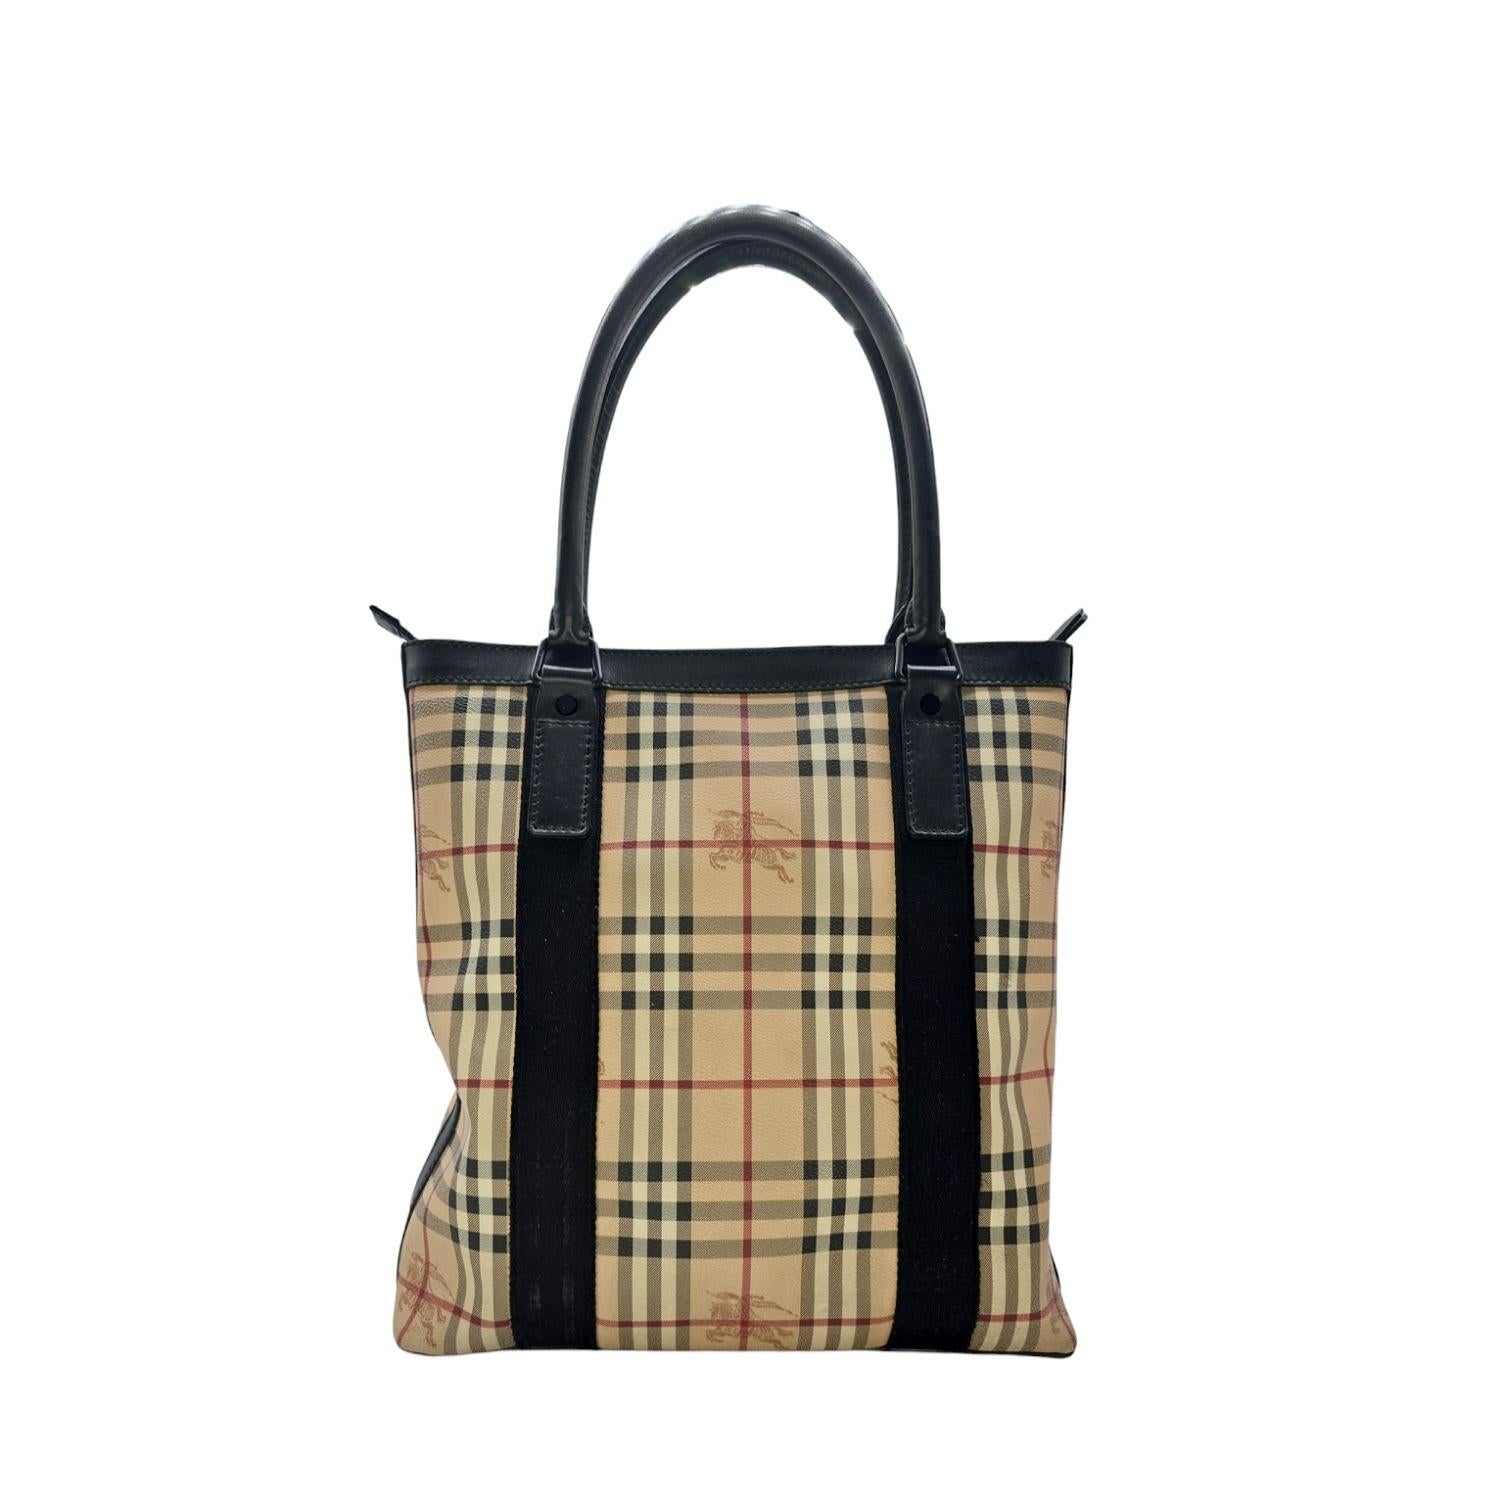 Burberry Haymarket Check Coated Canvas Tote In Excellent Condition For Sale In Scottsdale, AZ